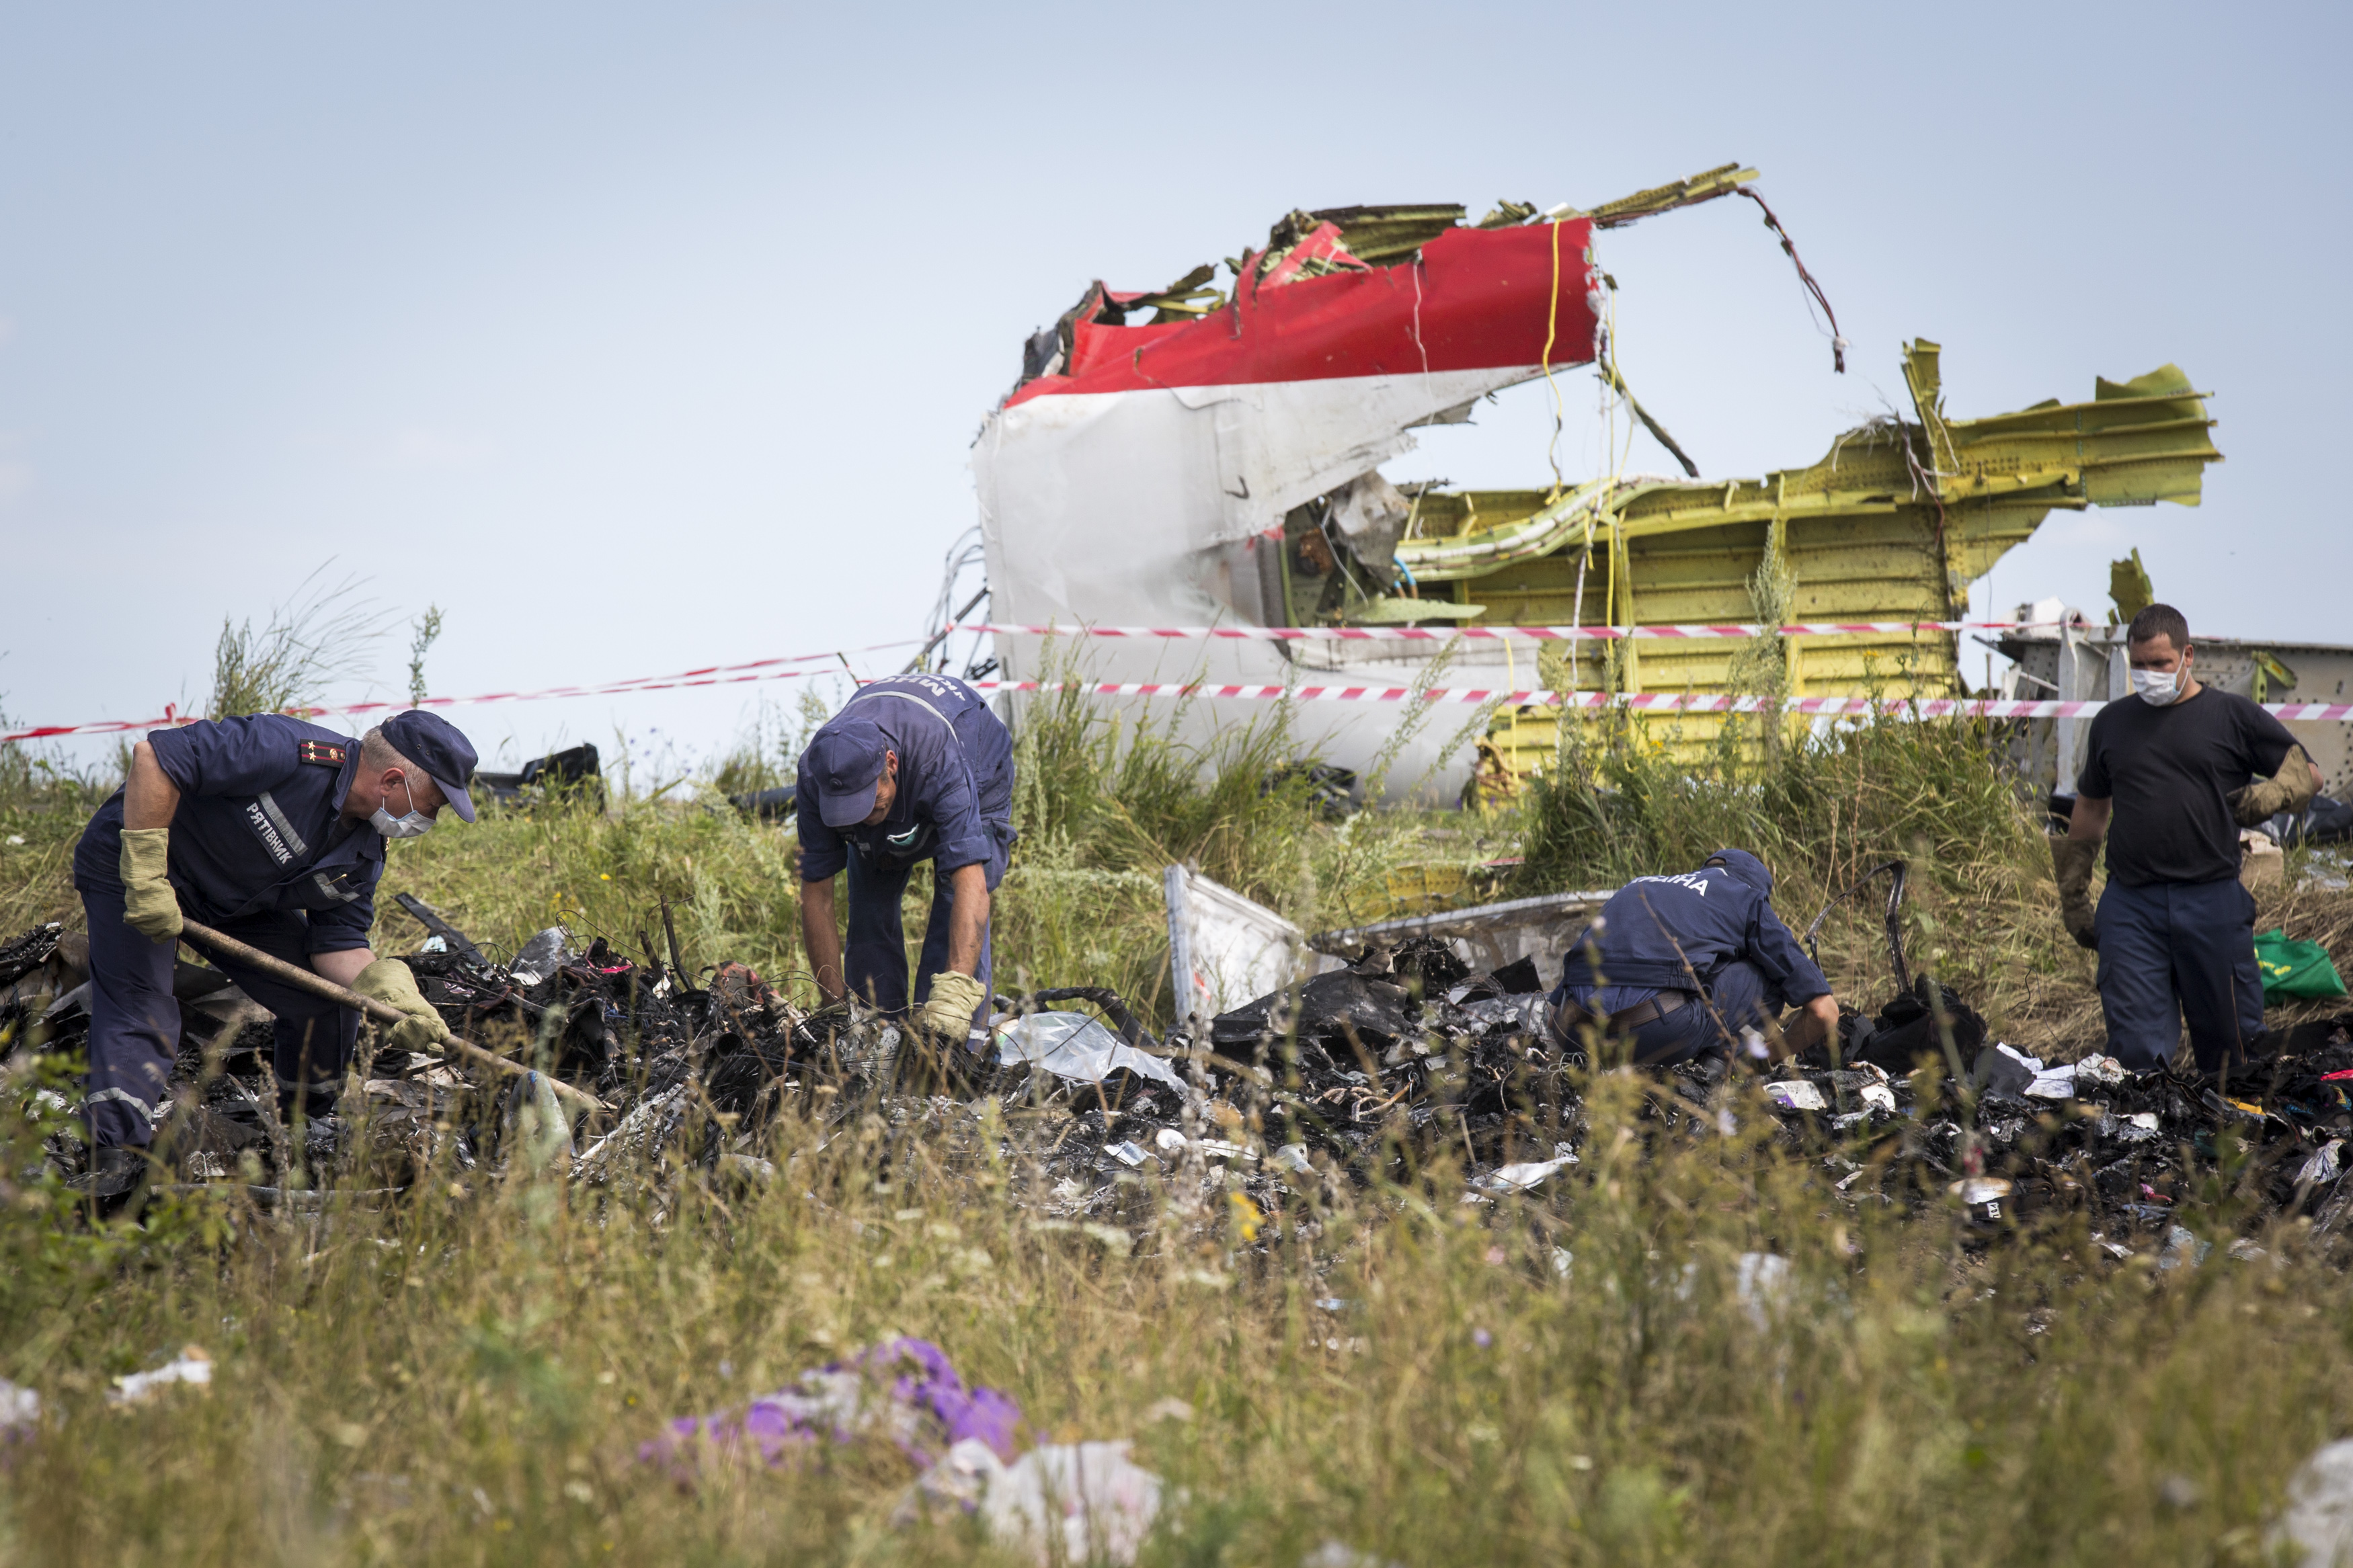 Ukrainian rescue servicemen look through the wreckage of Malaysia Airlines flight MH17 on July 20, 2014 in Grabovo, Ukraine. (Rob Stothard—Getty Images)